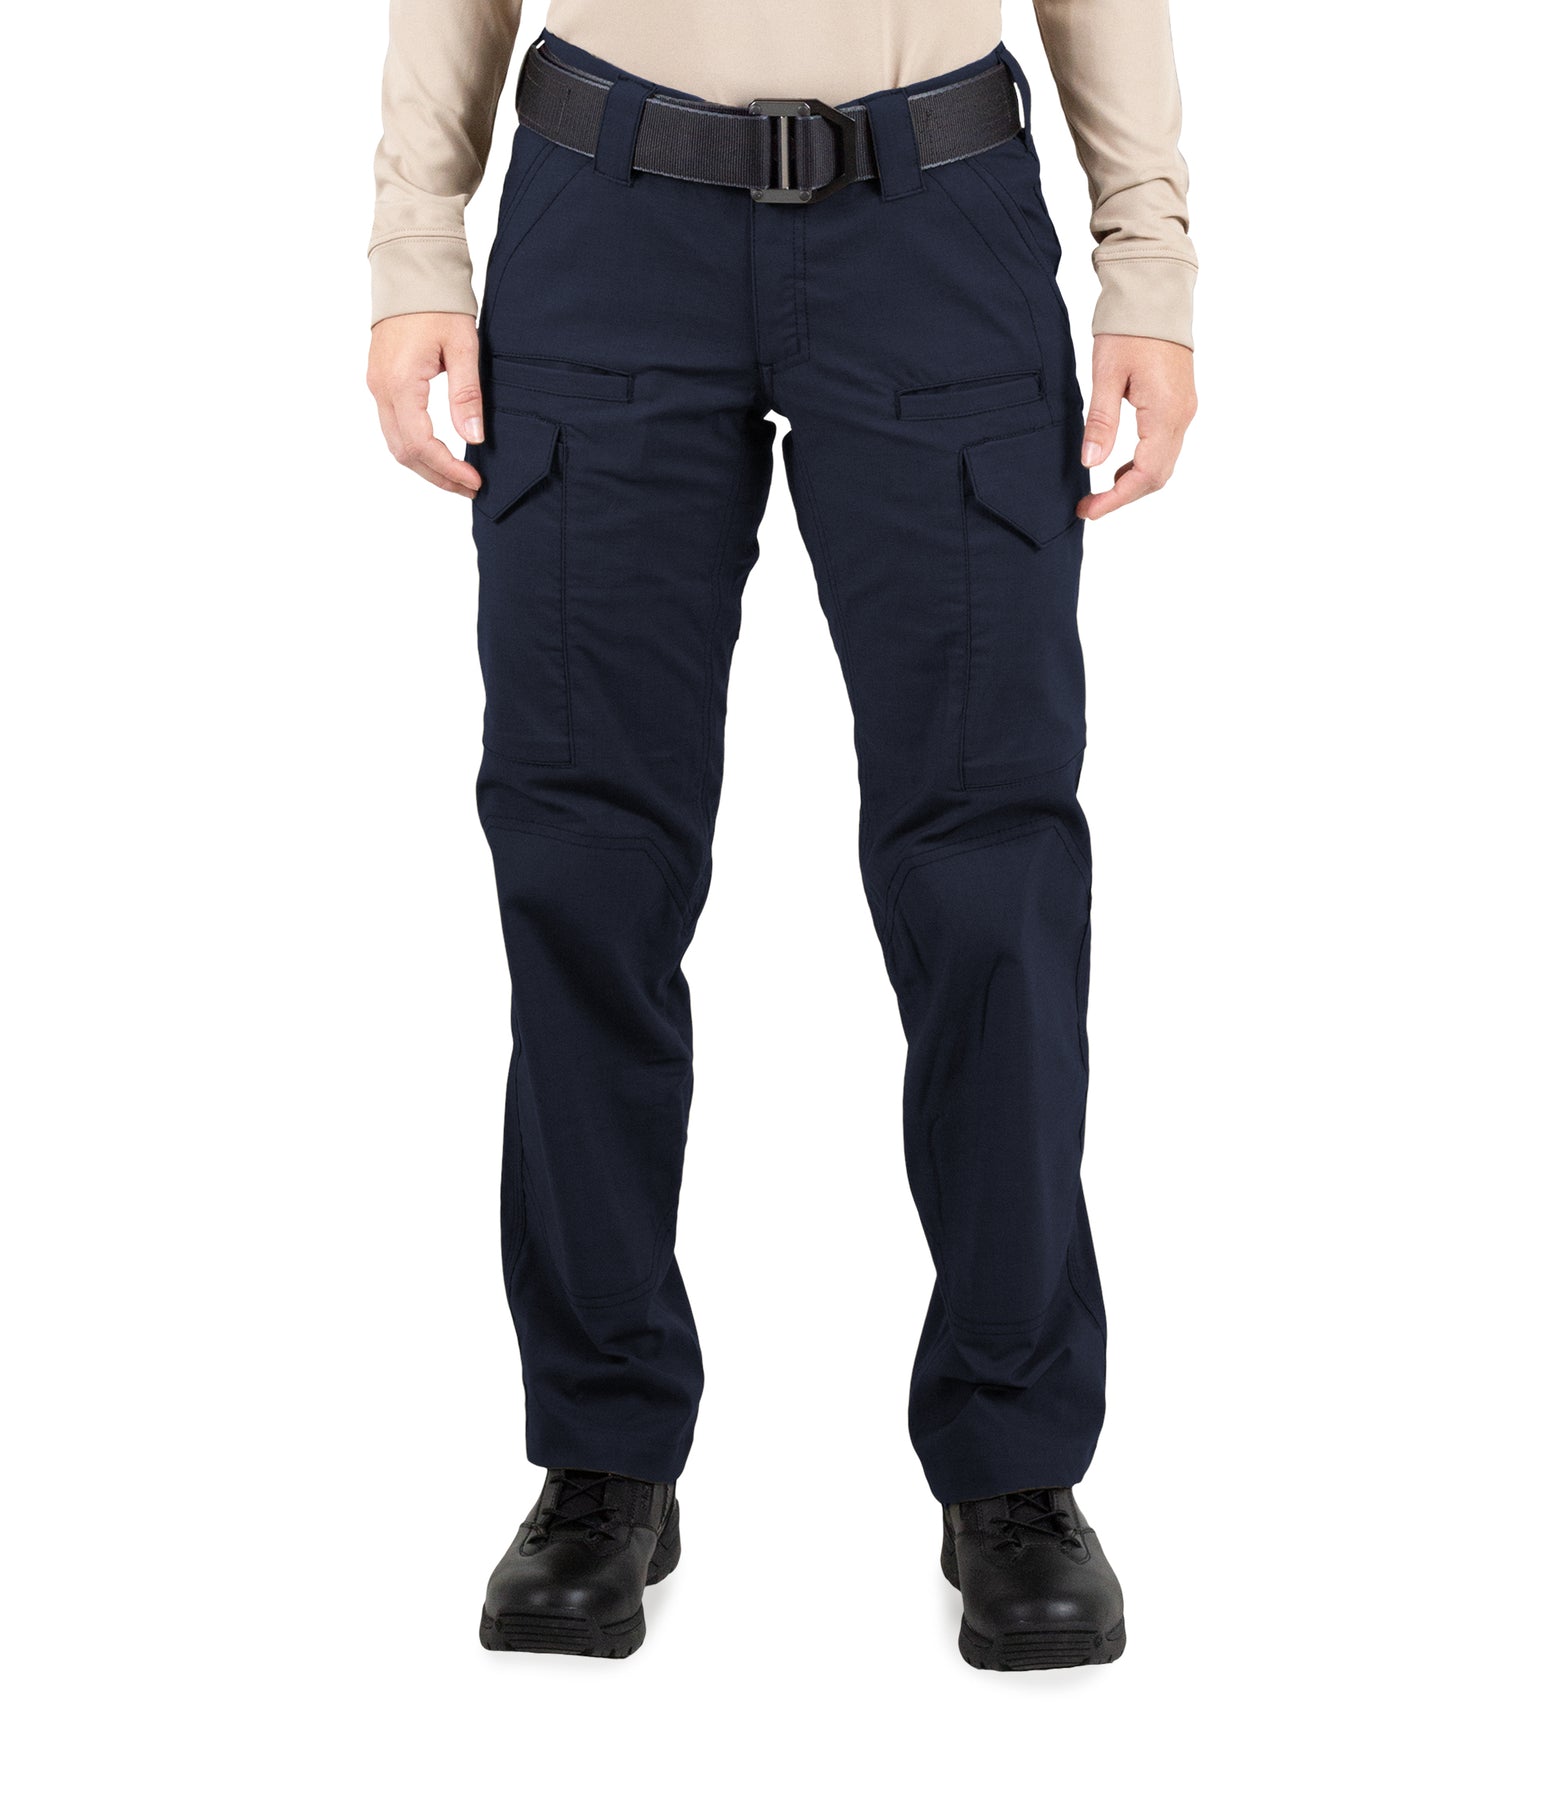 Women's V2 Tactical Pants / Midnight Navy – First Tactical